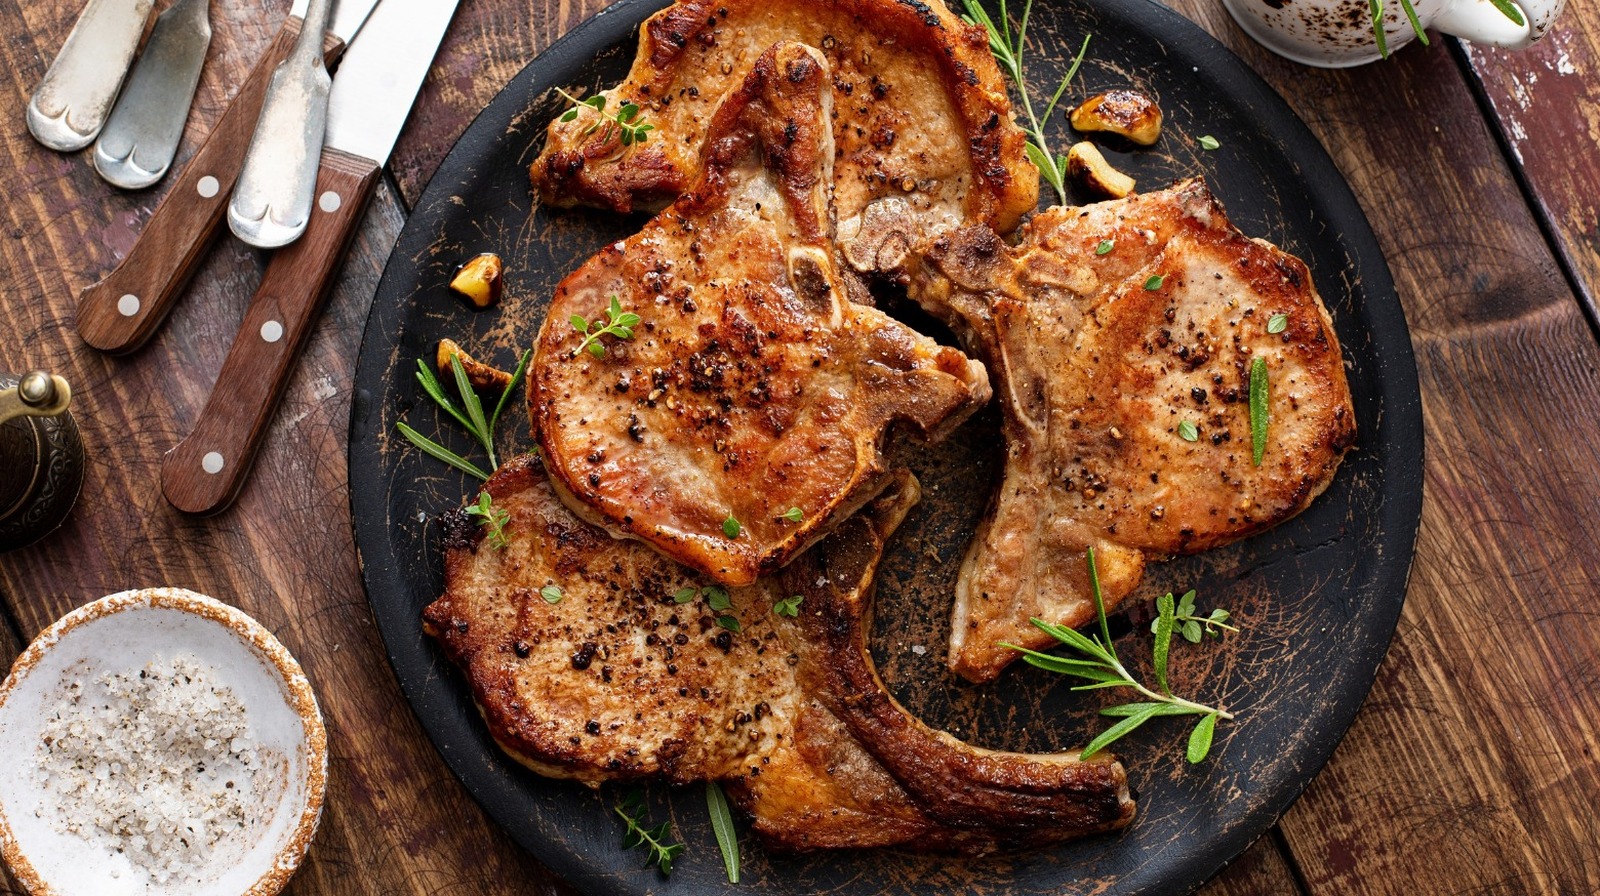 https://www.thedailymeal.com/img/gallery/11-ways-to-take-your-pork-chop-meals-to-the-next-level/l-intro-1669641866.jpg